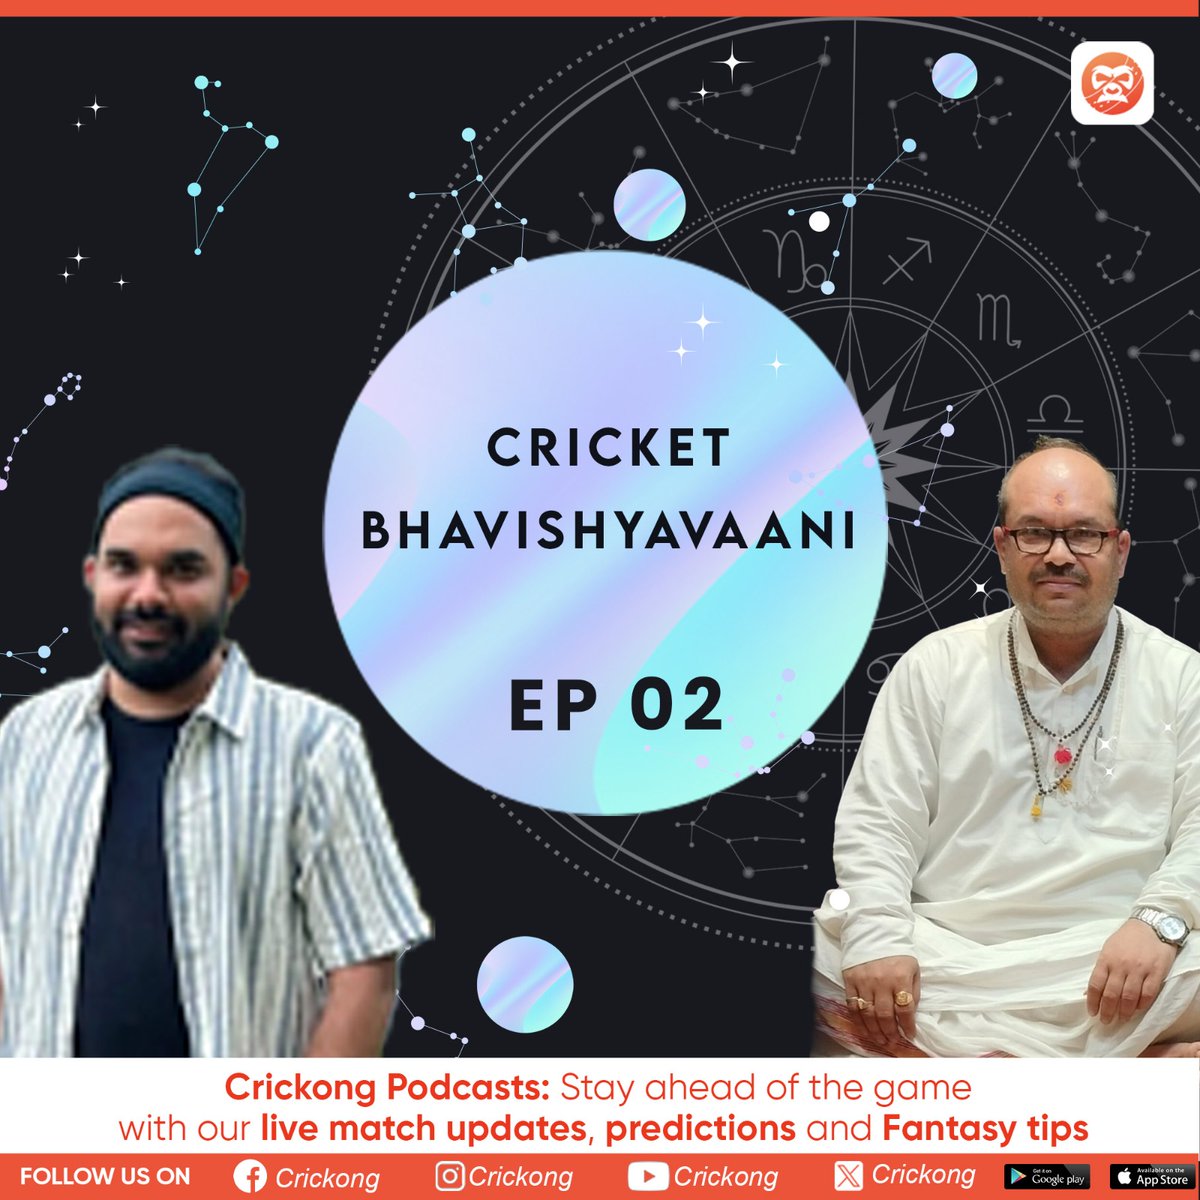 🔮🏏 Dive into Episode 2 of 𝑪𝑹𝑰𝑪𝑲𝑬𝑻  𝐁𝐡𝐚𝐯𝐢𝐬𝐡𝐲𝐚𝐯𝐚𝐧𝐢! 🔥✨

Get ready for expert astrological cricket predictions on the thrilling Asia Cup matches! 🌟🇮🇳🇵🇰🏏

Don't miss it! Click on the link now!
share.crickong.com/podcast/1182

#Crickong #AstrologyPredictions